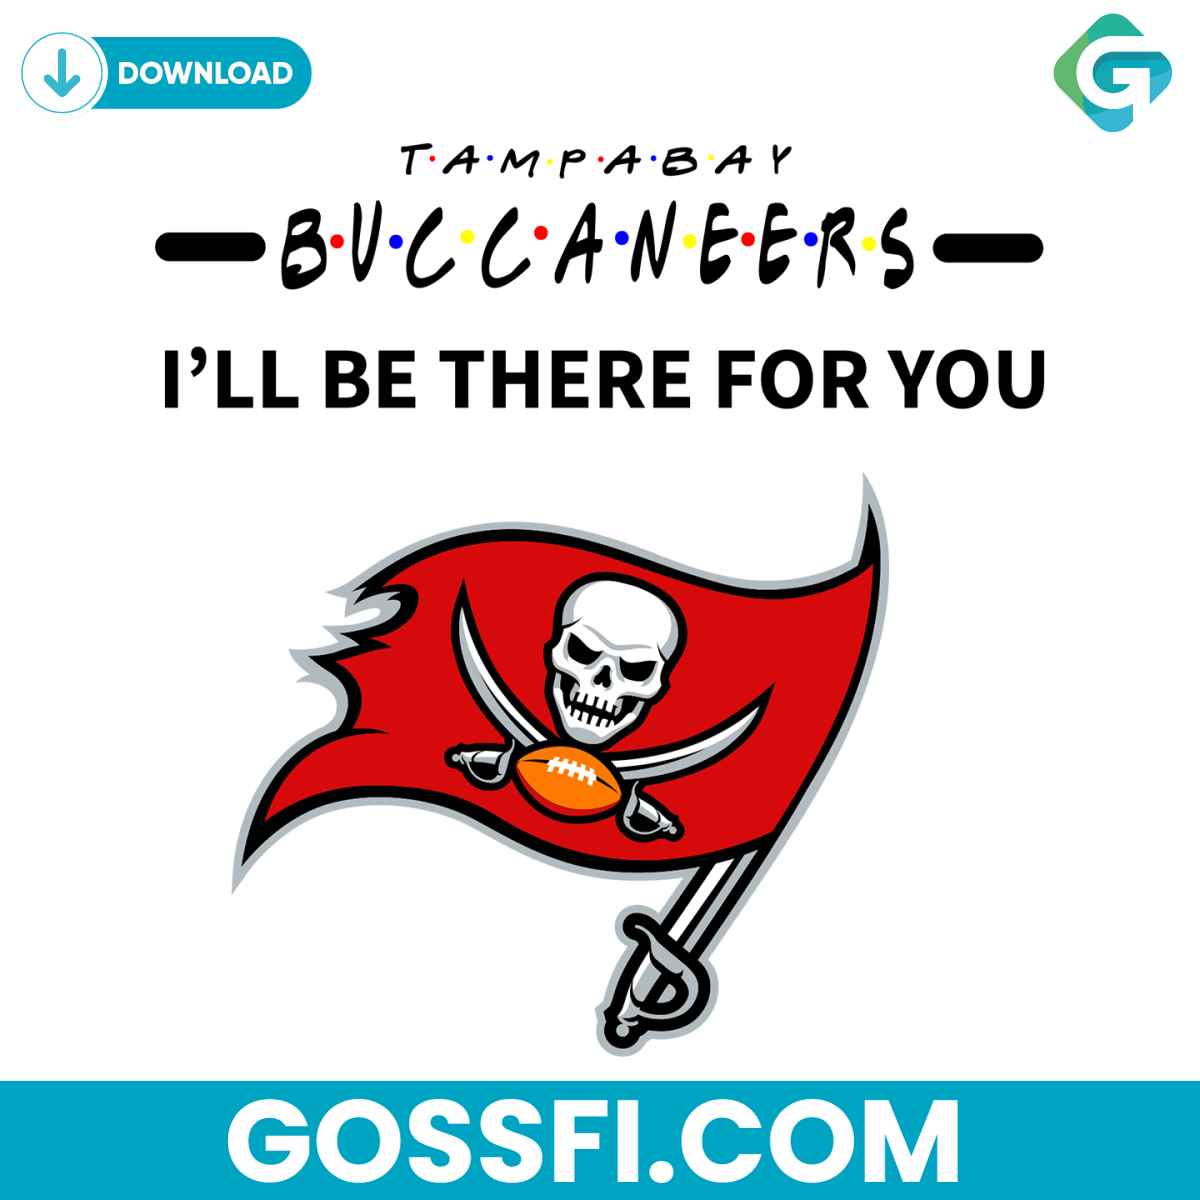 buccaneers-i-will-be-there-for-you-svg